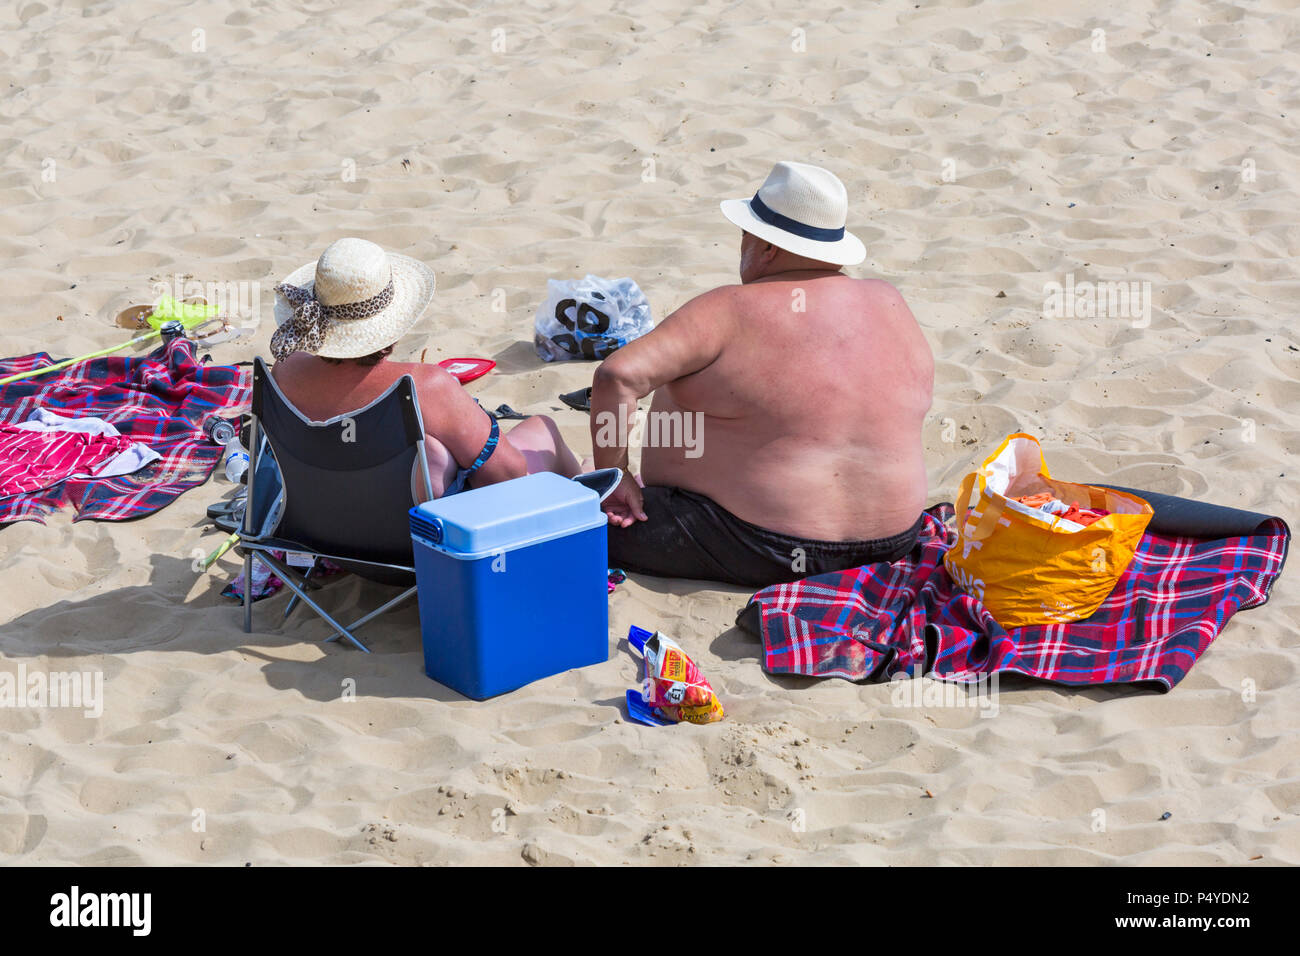 Bournemouth, Dorset, UK. 23rd June 2018. UK weather: crowded beaches on a lovely hot sunny day as visitors head to the seaside to make the most of the sunshine as temperatures rise for the heatwave. Couple sunbathing on the beach - overweight fat man Stock Photo